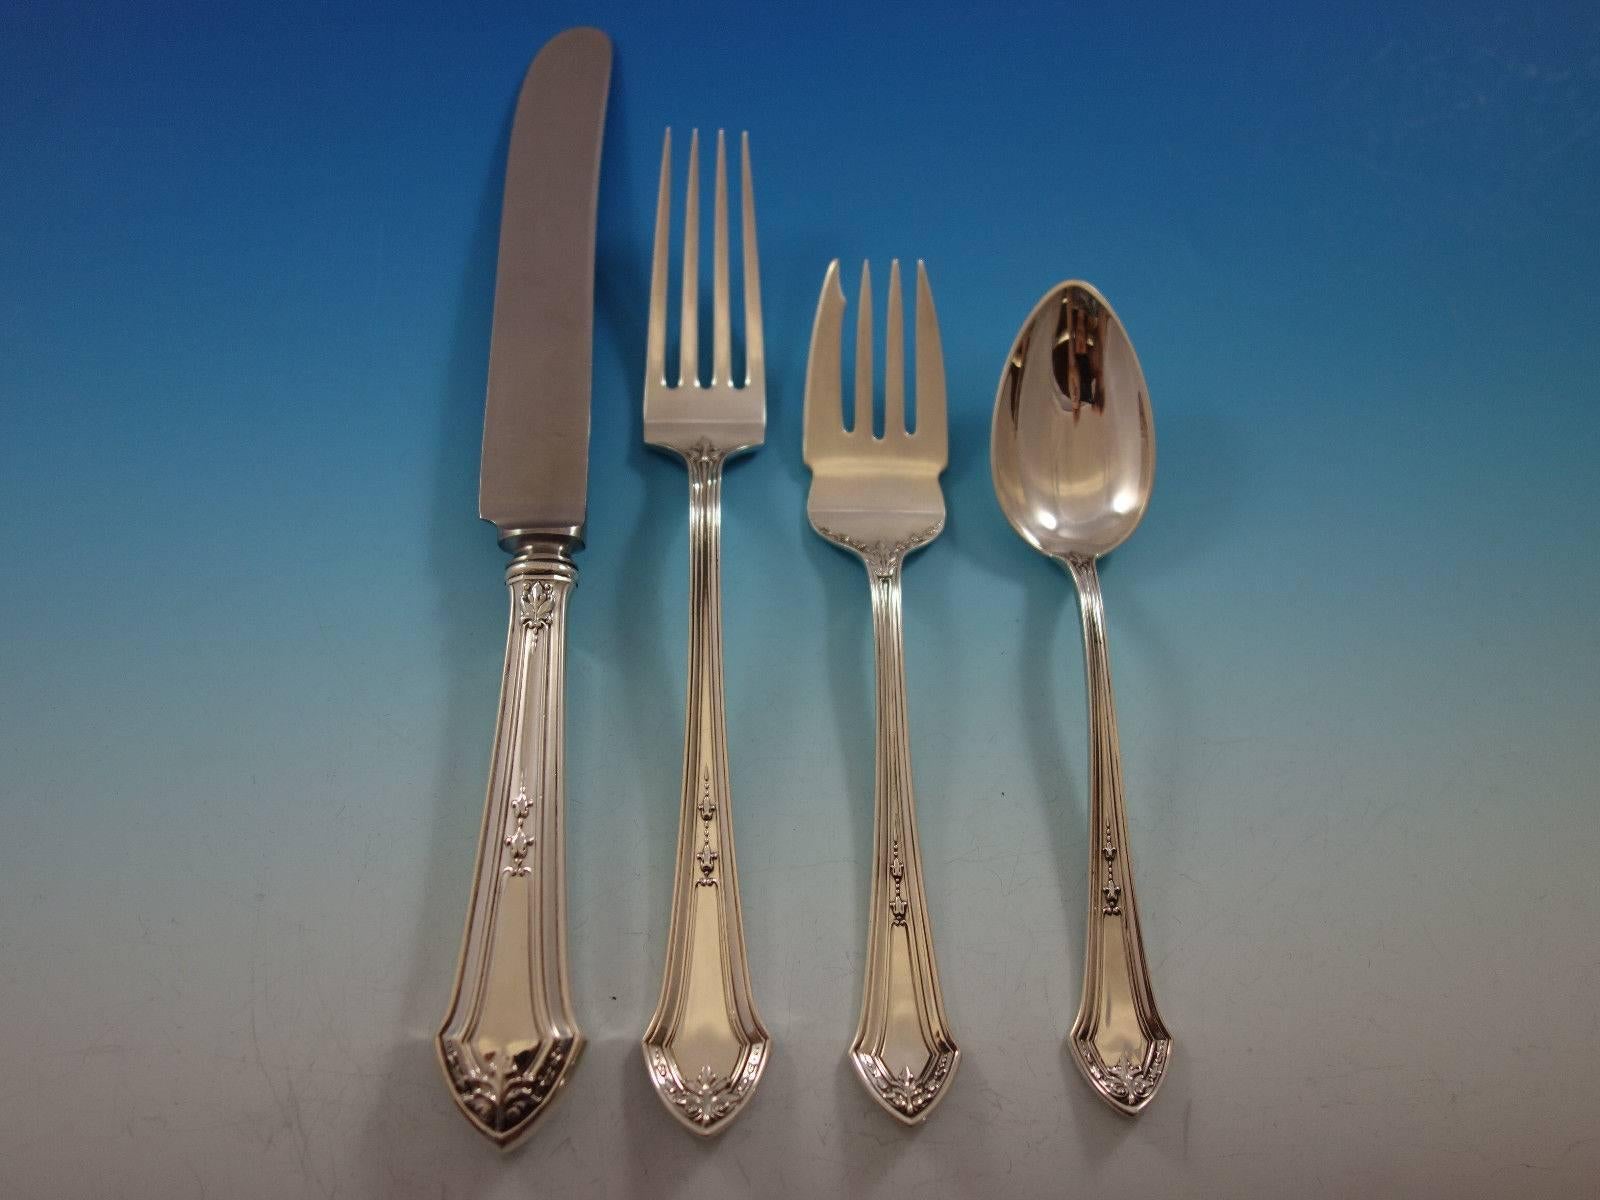 Lenox by Durgin sterling silver flatware set, 52 pieces. This set includes: 

12 knives, 8 7/8